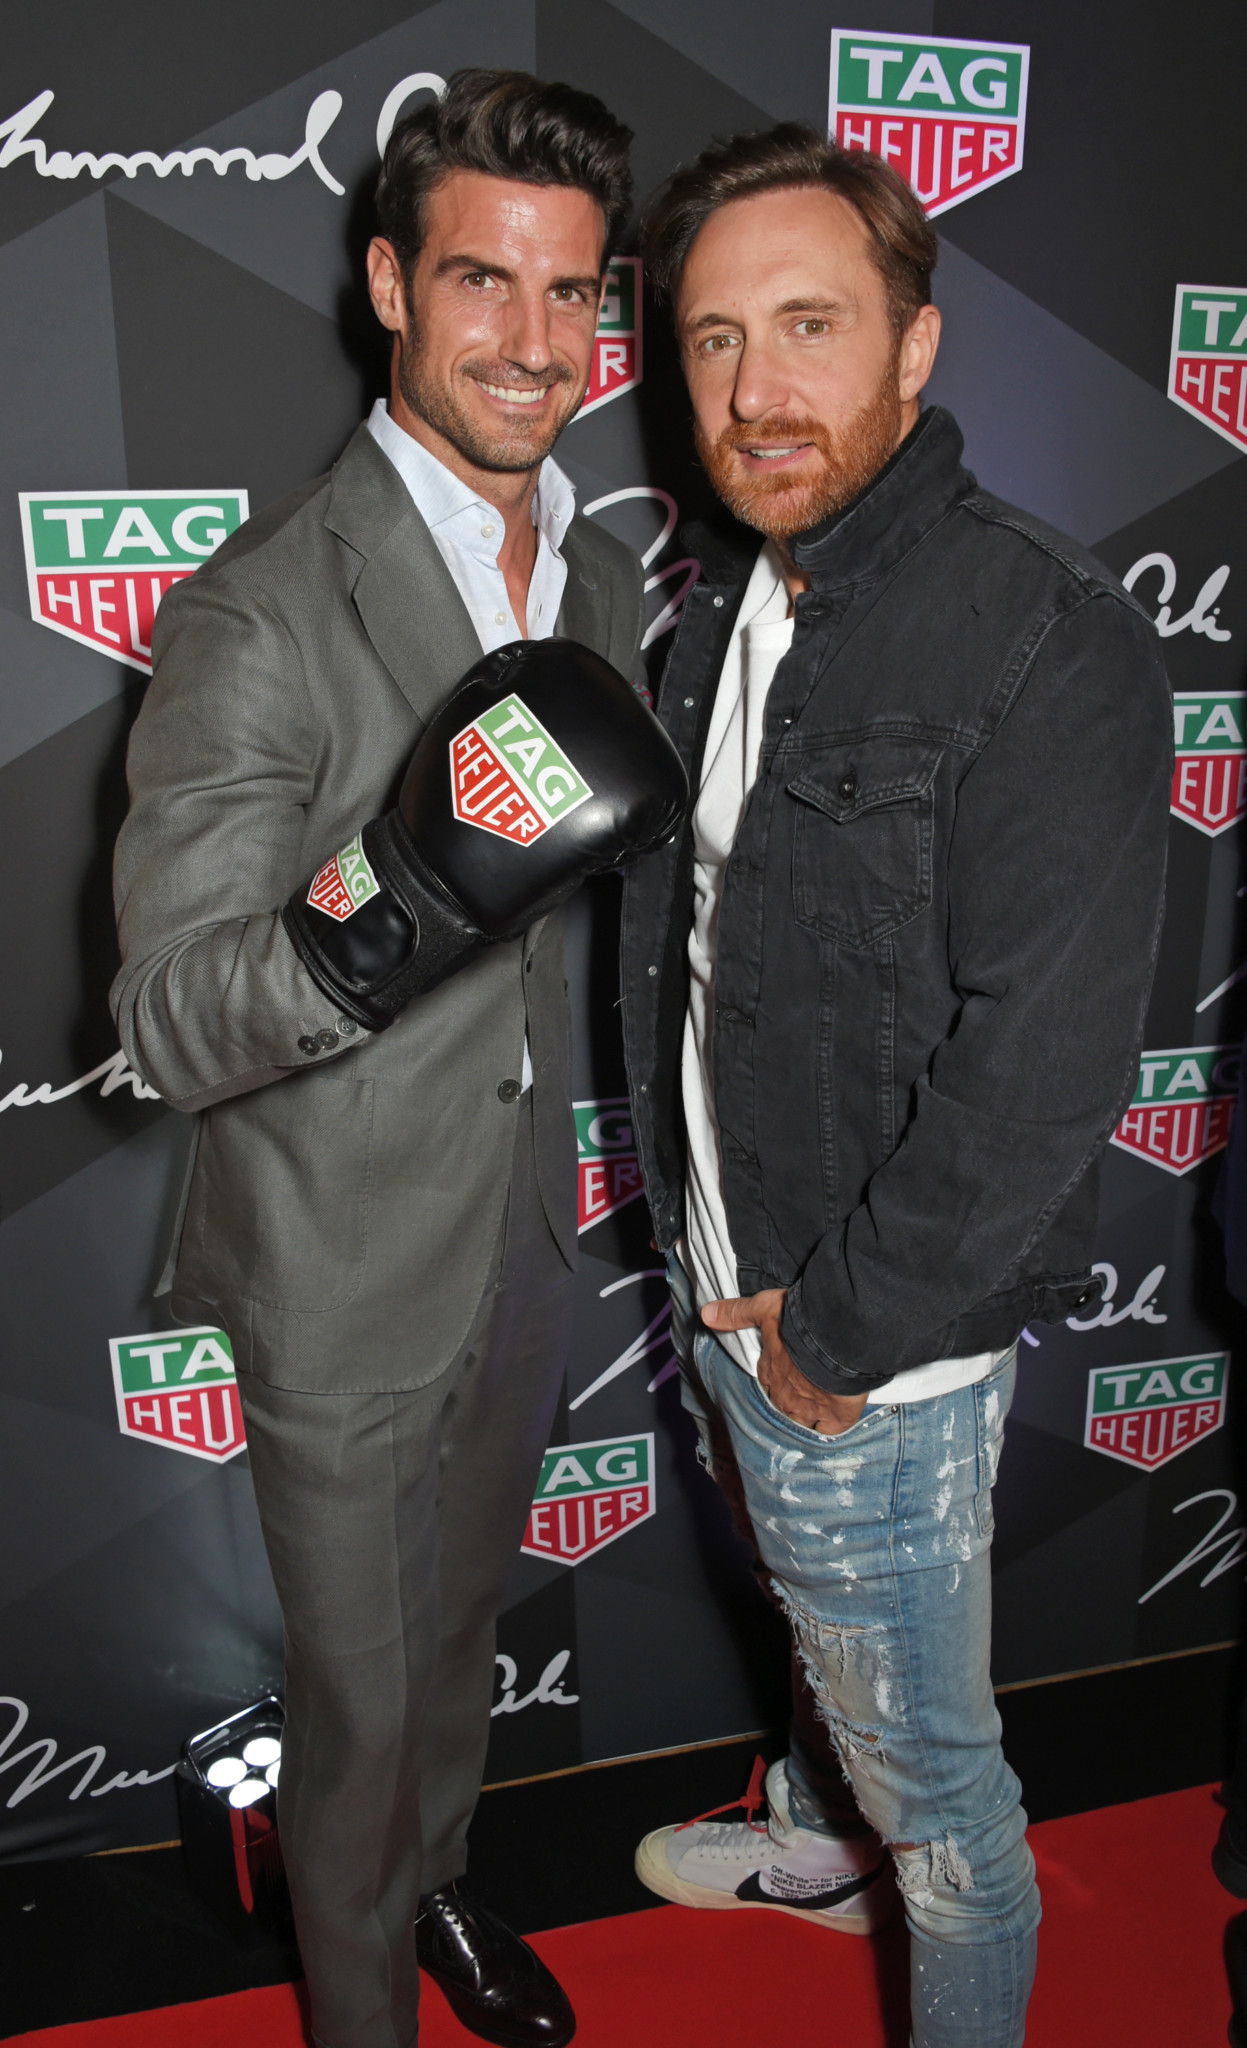 London, england - october 10:  aitor ocio (l) and david guetta attend the launch of the tag heuer muhammad ali limited edition timepieces at bxr gym on october 10, 2017 in london, england. Pic credit: dave benett